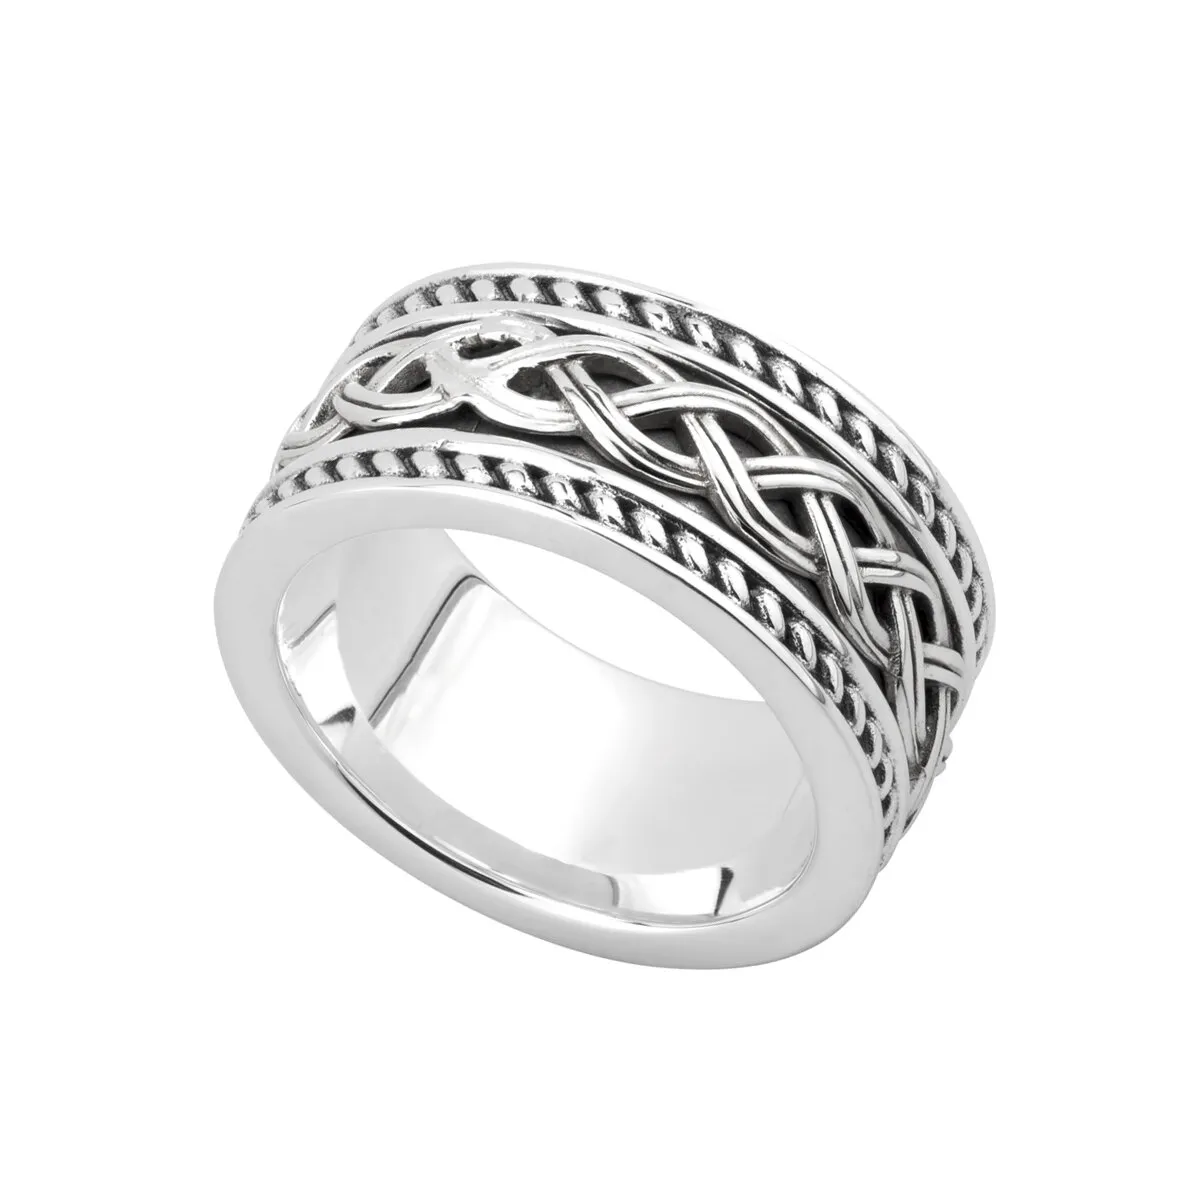 Gents Silver Celtic Knot Ring...